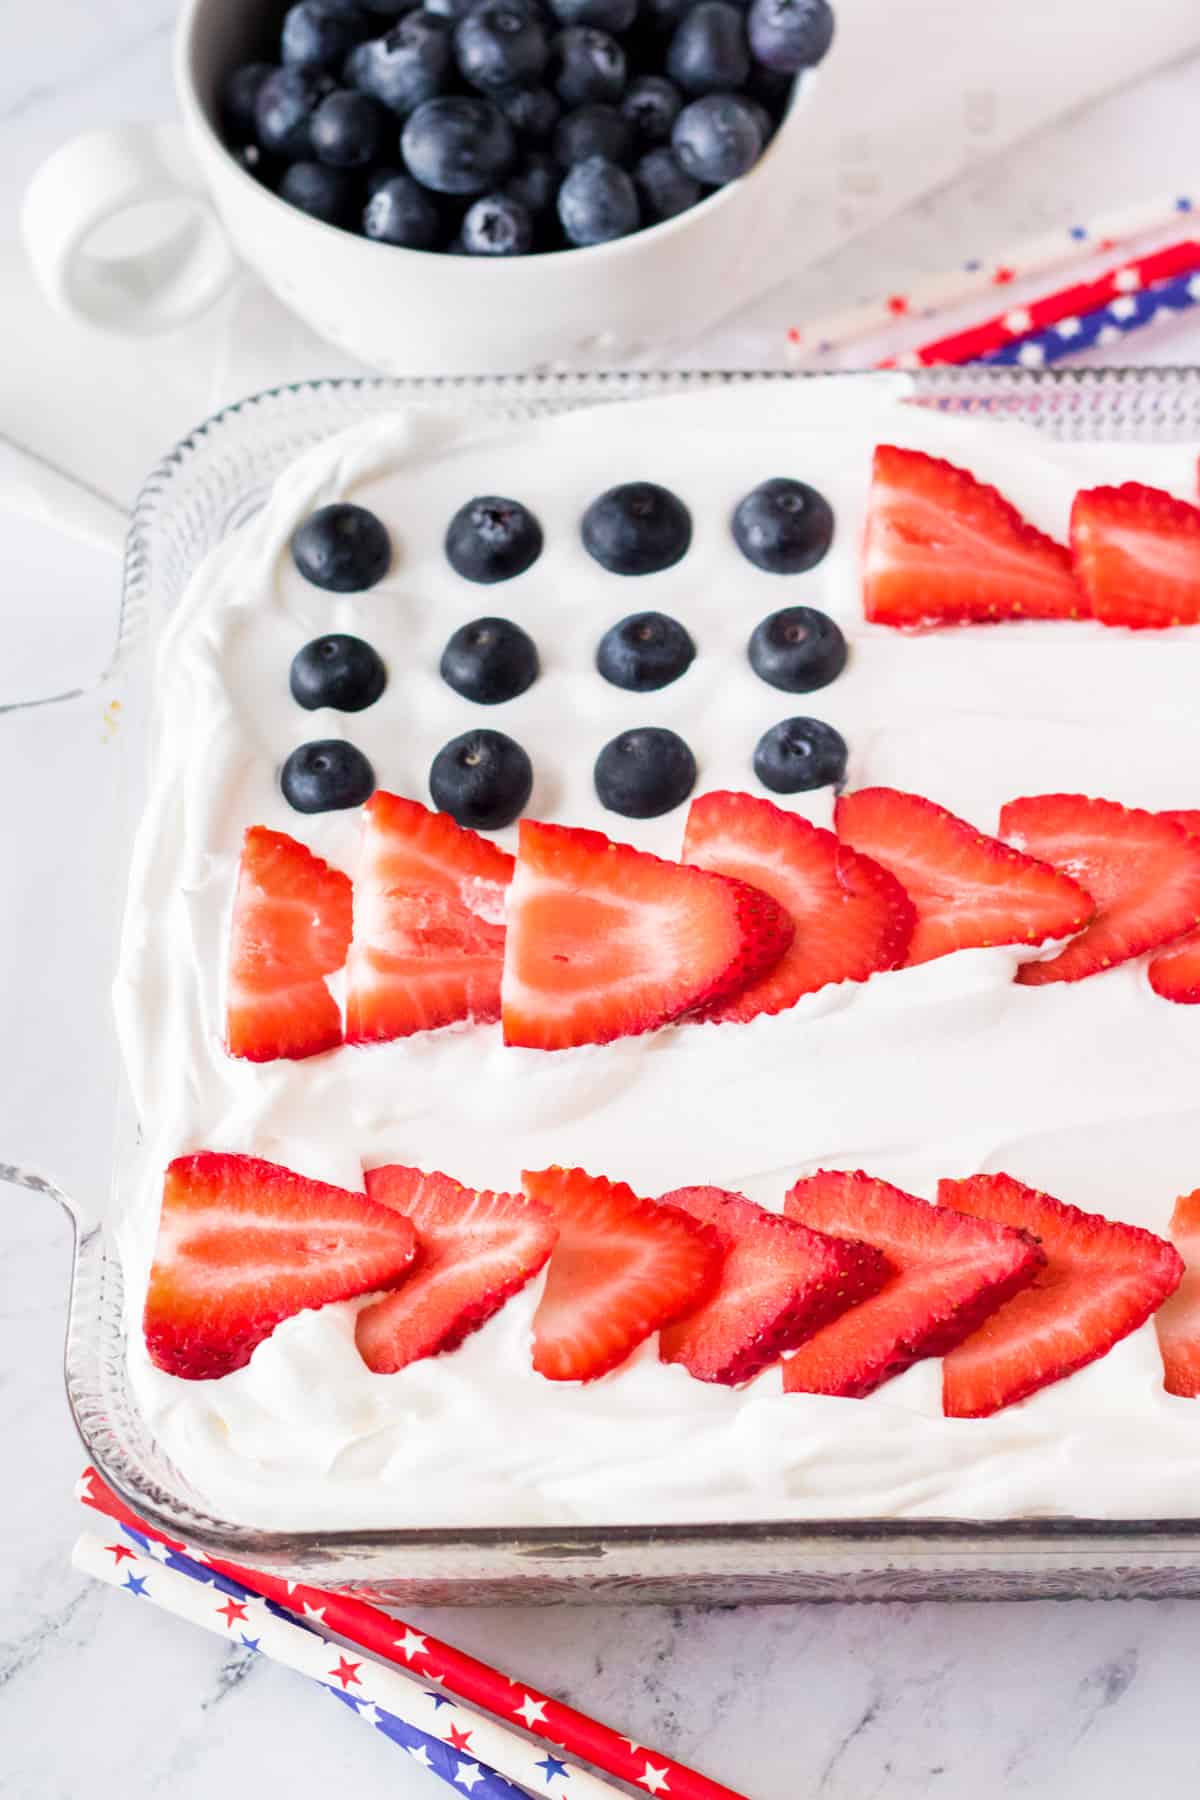 American flag cake made with blueberries and sliced strawberries. 